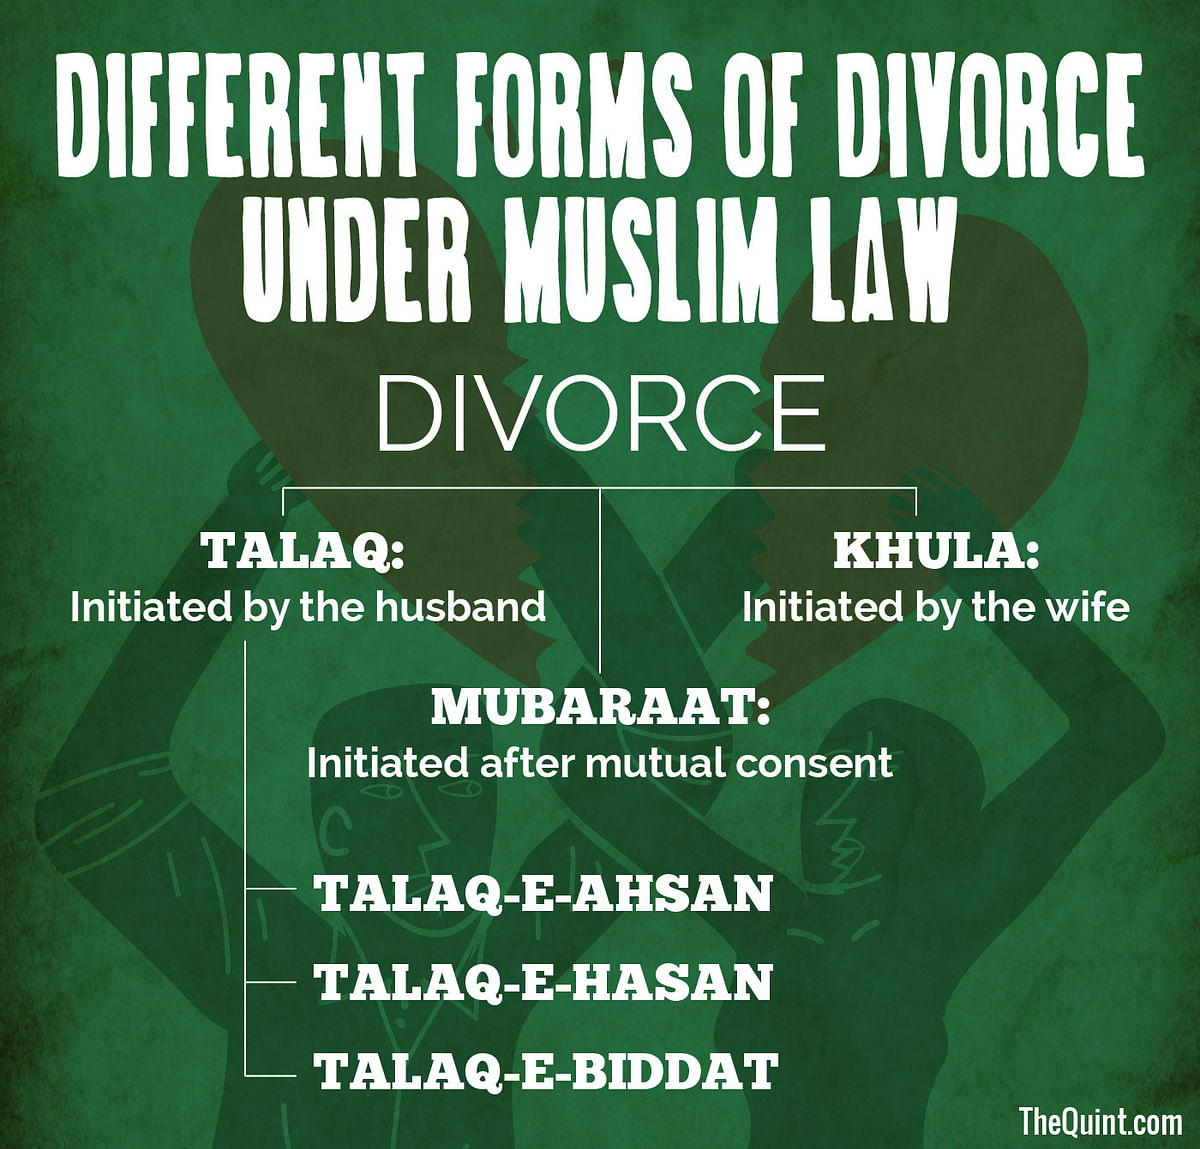 Triple talaq comes under ‘talaq-e-biddat’, which is different from more “desirable” and “proper” forms of divorce.